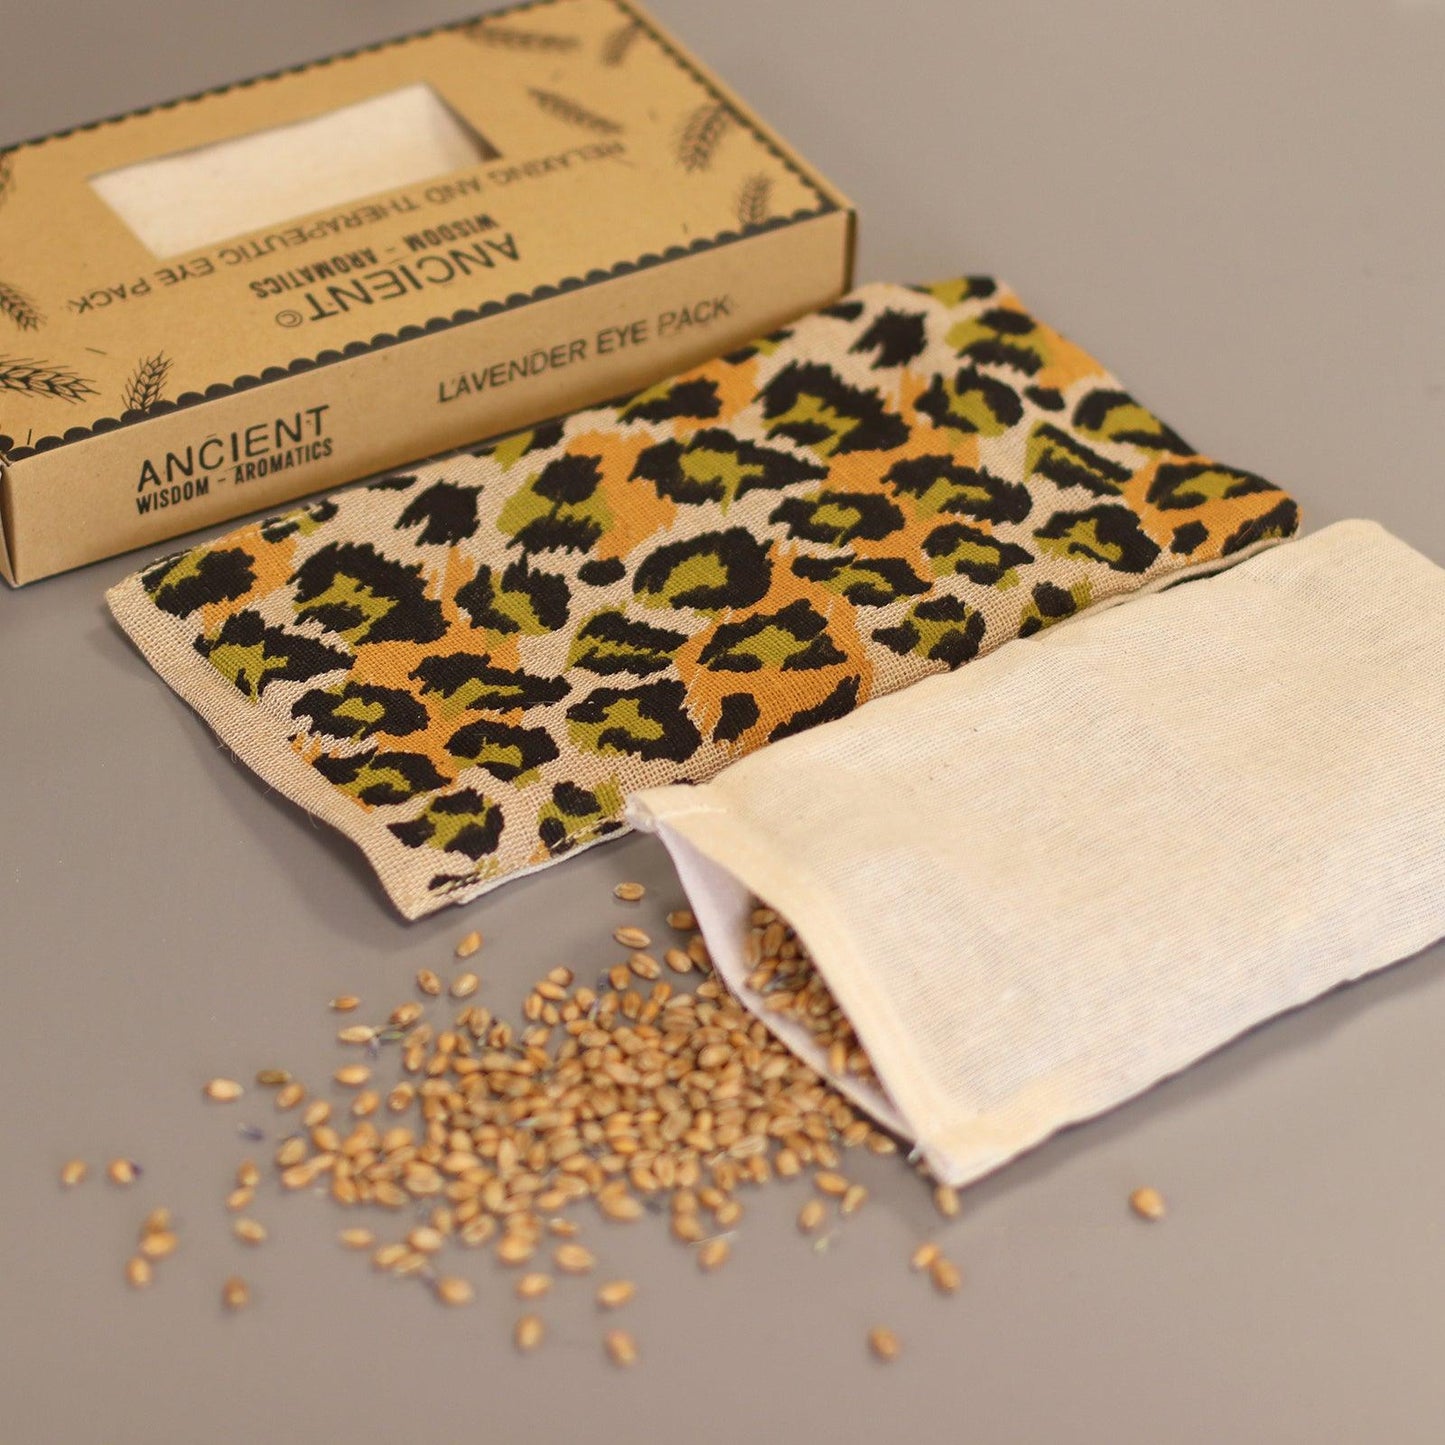 Lavender Natural Cotton and Juco Eye Pillow in Gift Box - Night Leopard - DuvetDay.co.uk